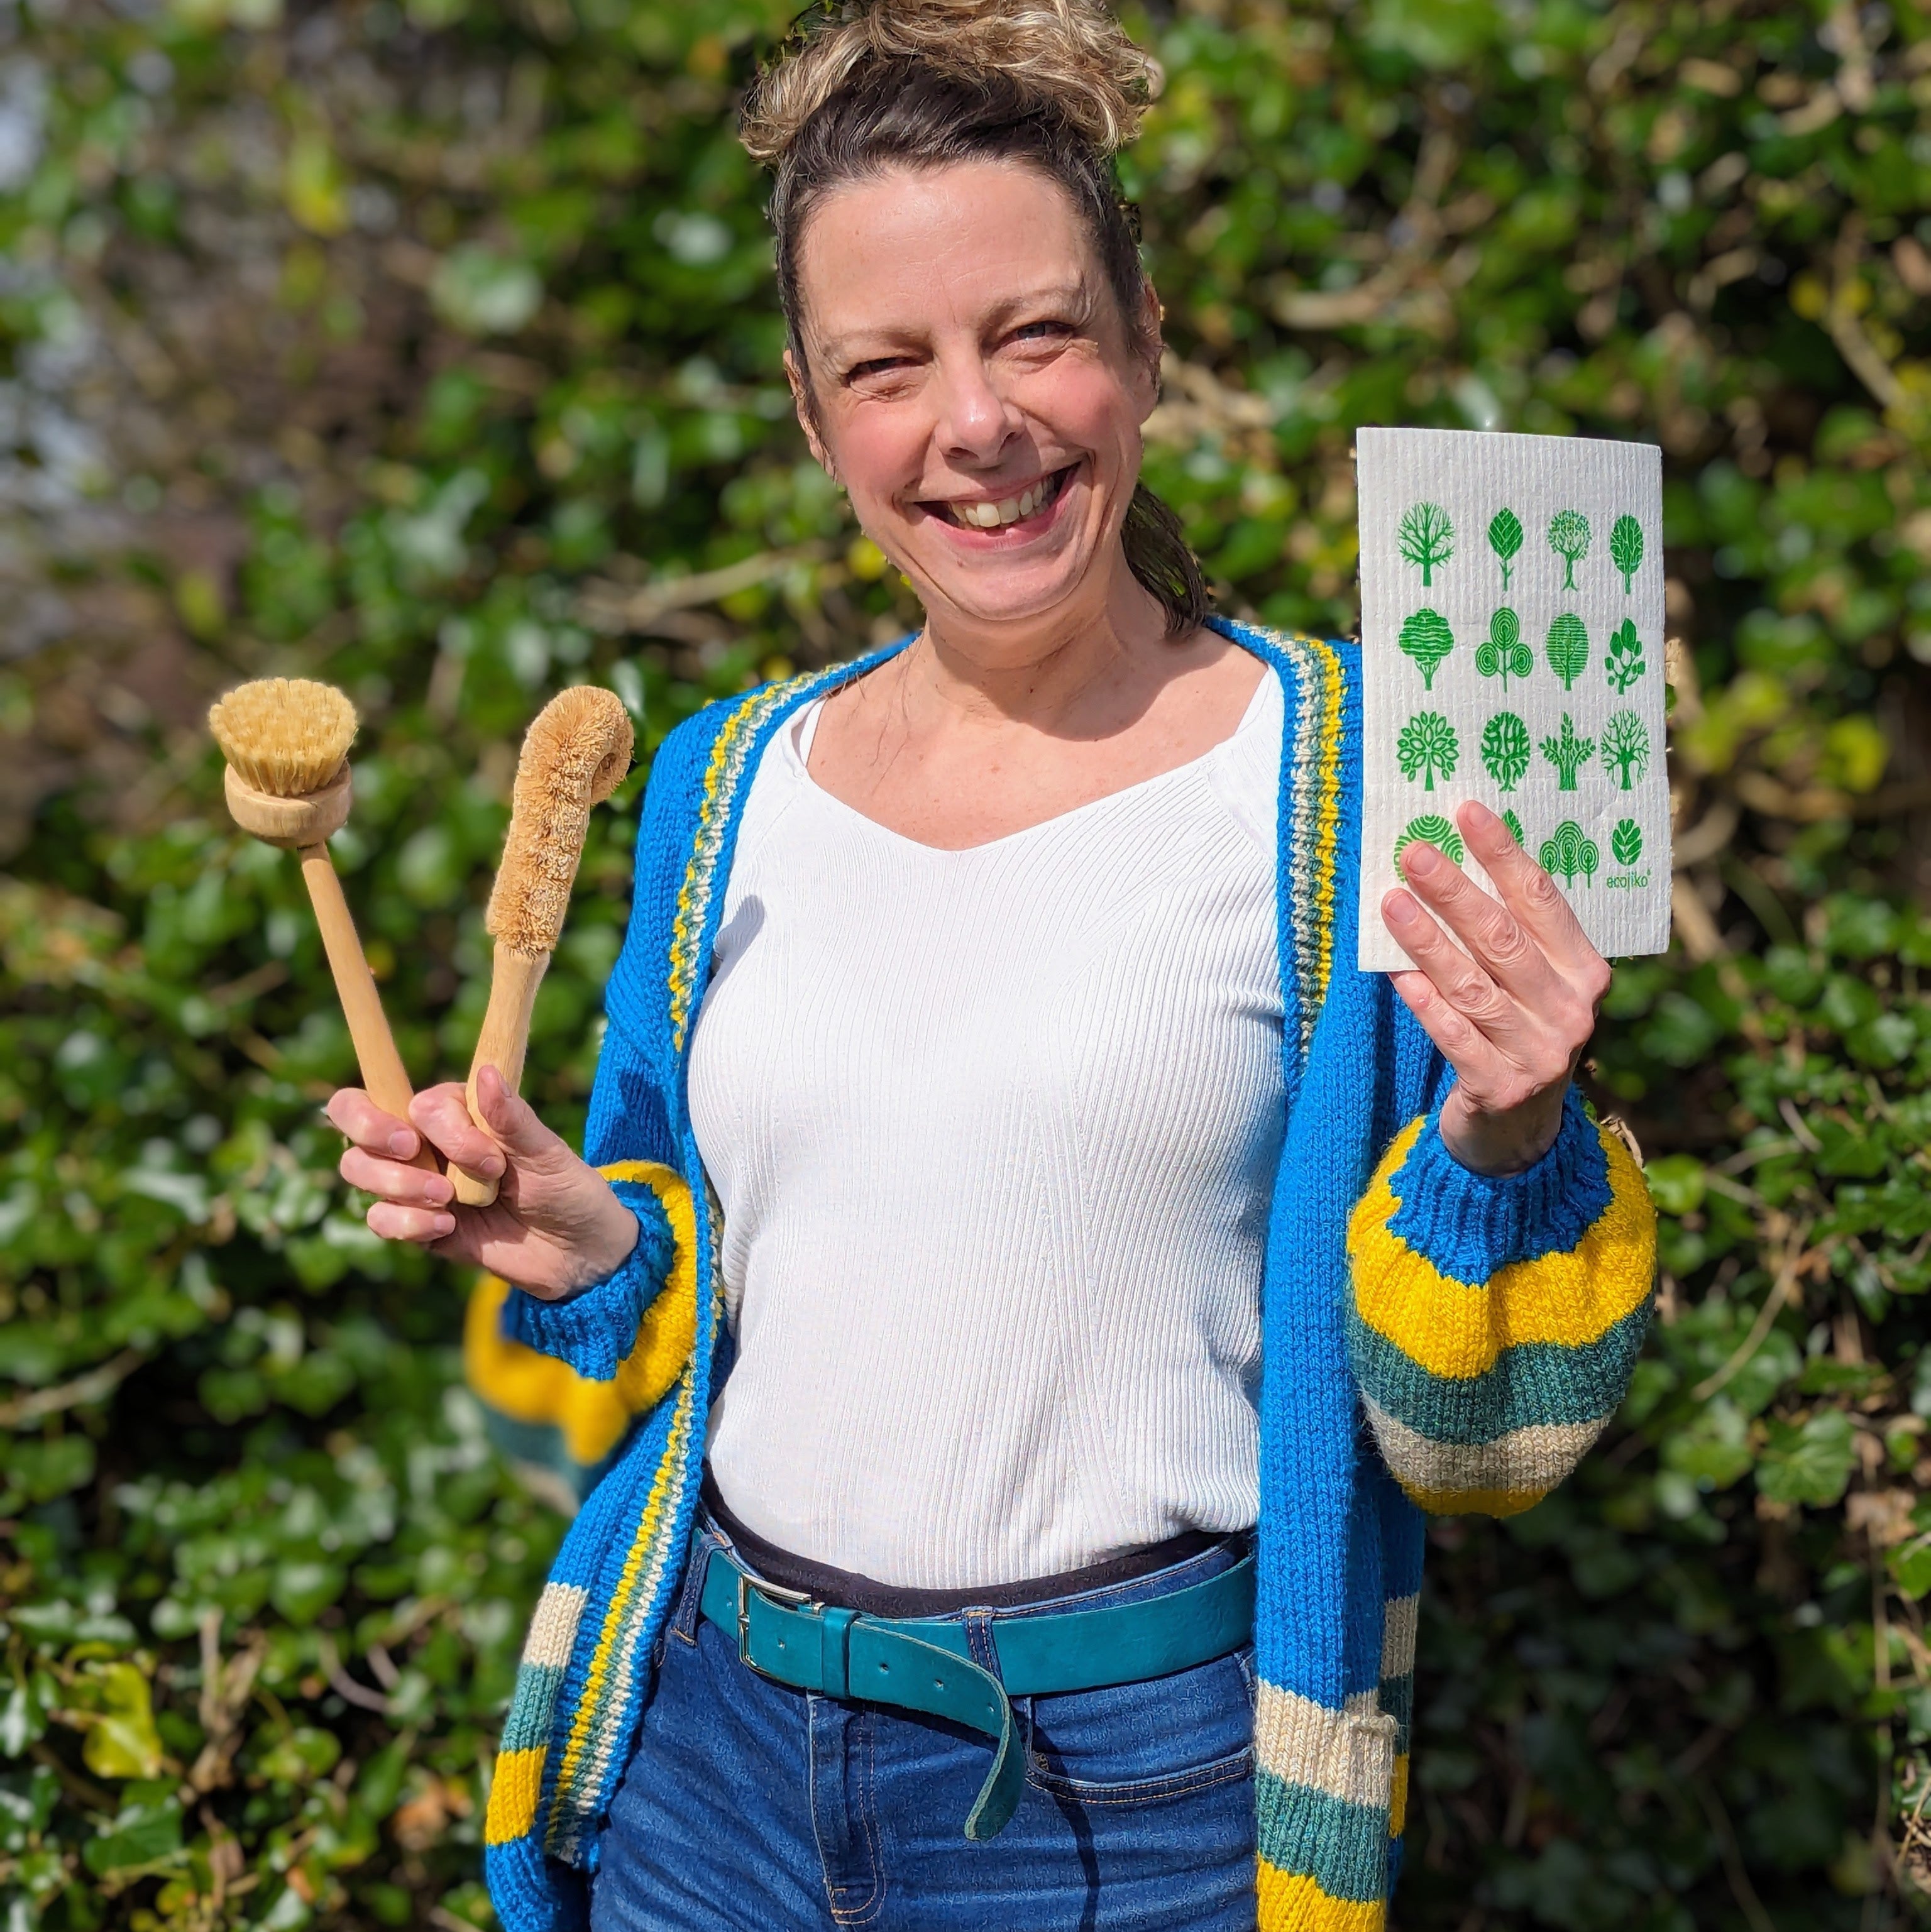 Katy Davies founder of ecojiko holding plastic free dish brushes and compostable cloth in garden